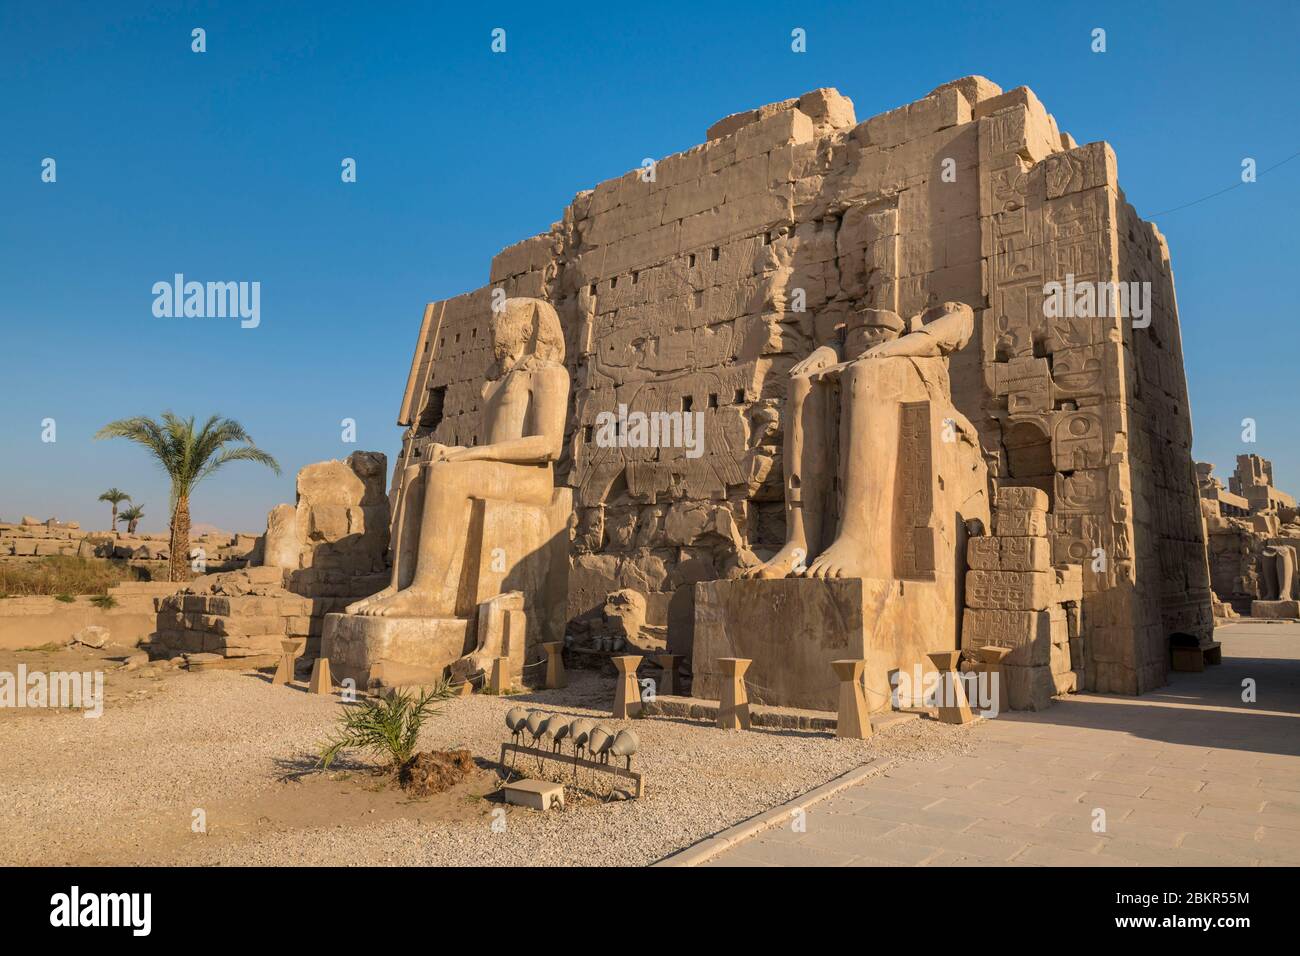 Egypt, Upper Egypt, Nile valley, Luxor, Karnak, listed as World Heritage by UNESCO, temple of Amun, statues of Rameses II Stock Photo